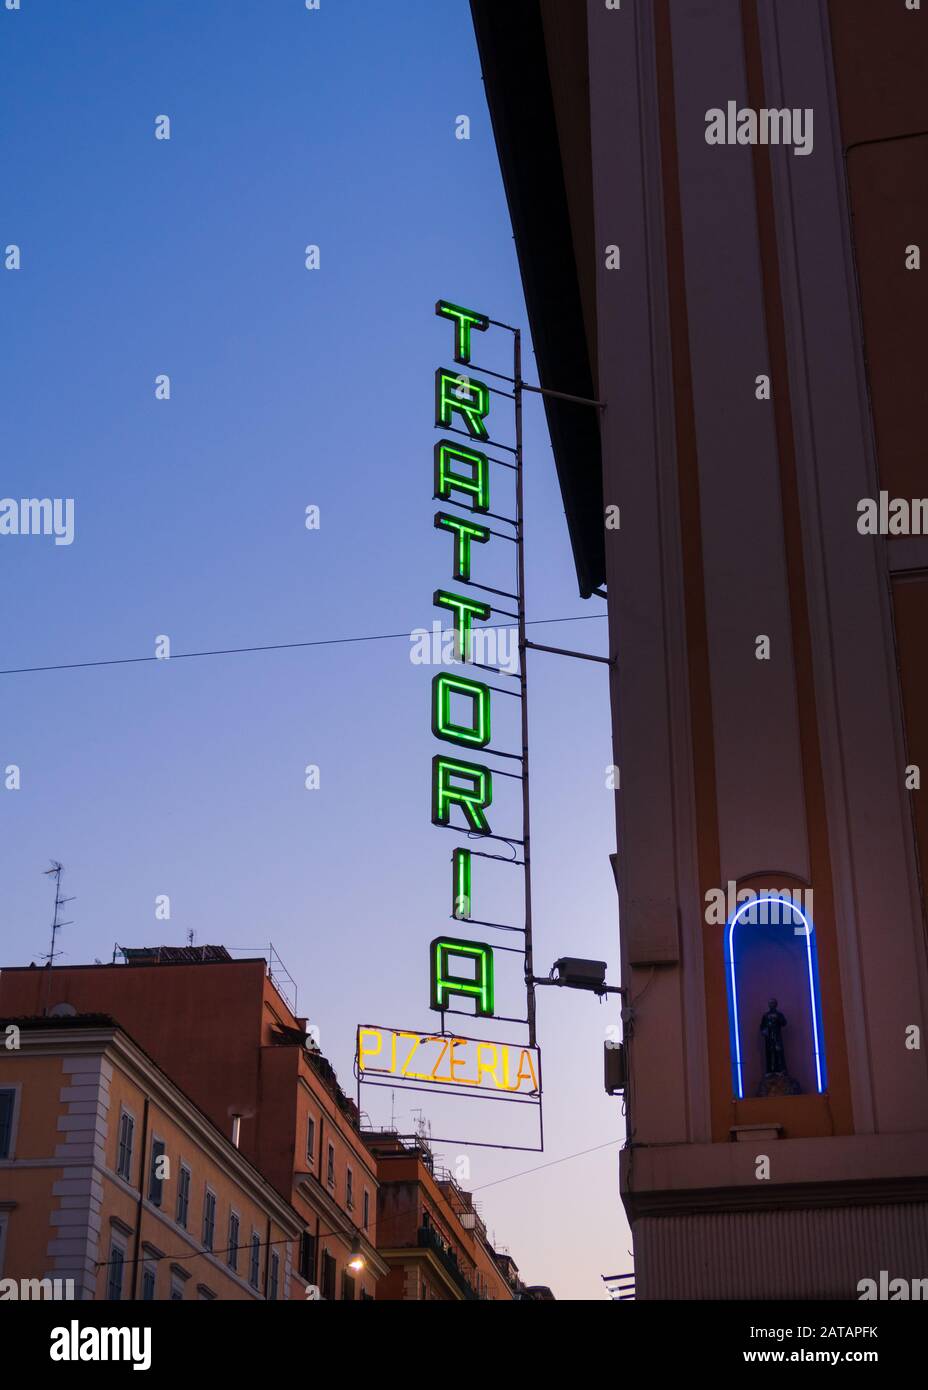 Rome, Italy - Jan 2, 2020: A green neon Trattoria sign on the side of a building in Rome, Italy. A Trattoria is an Italian eating establishment, less Stock Photo